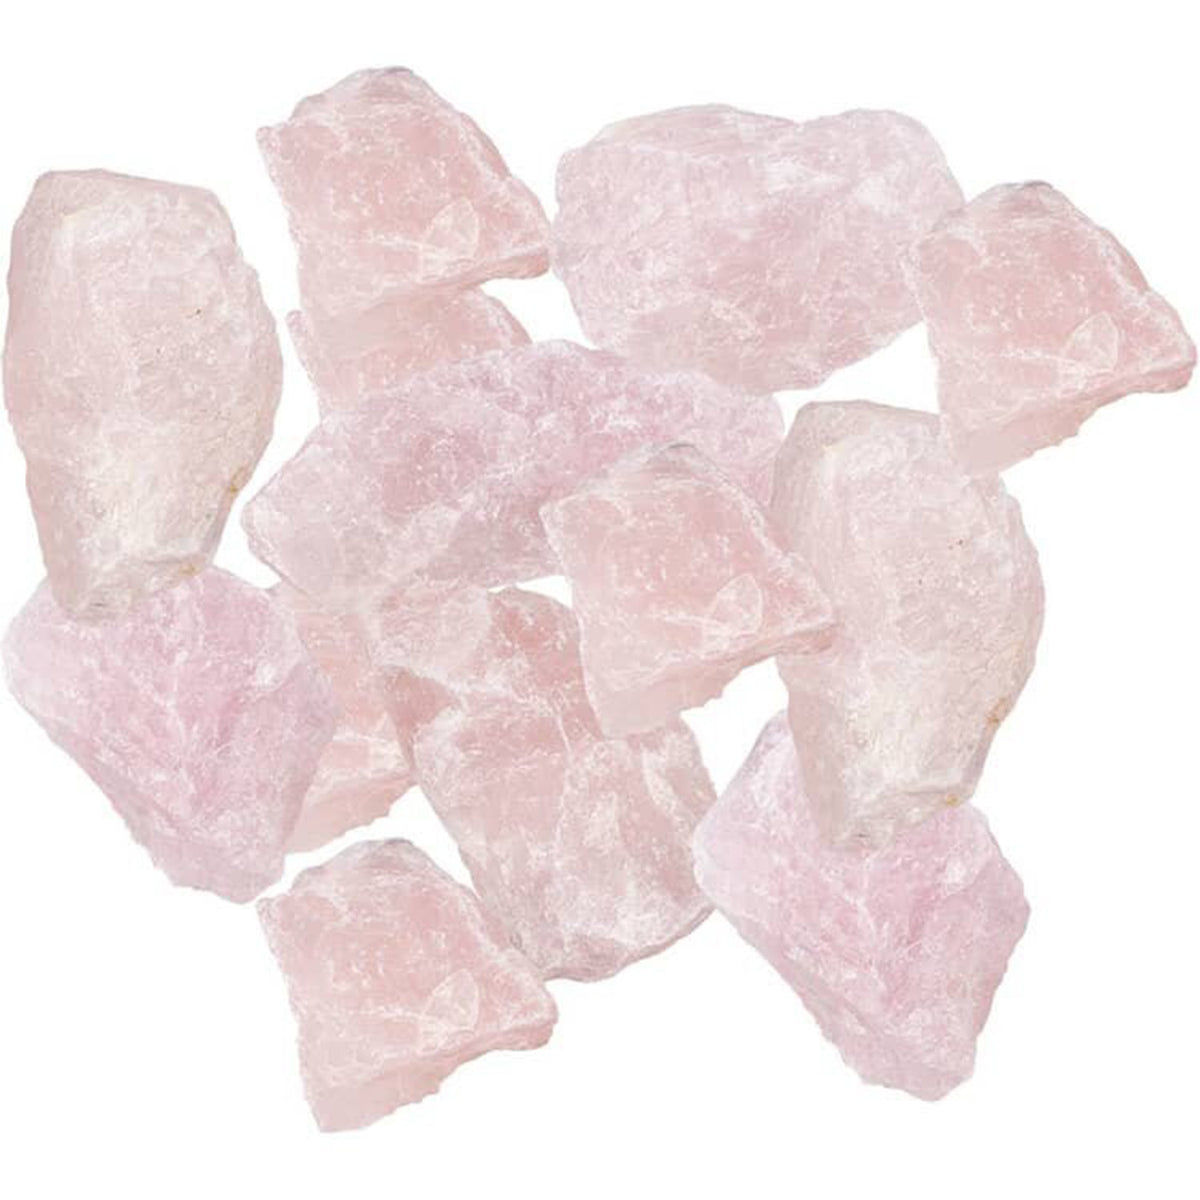 Rose Quartz Crystal Chunk Natural Pink soothing Stone | My Little Magic Shop